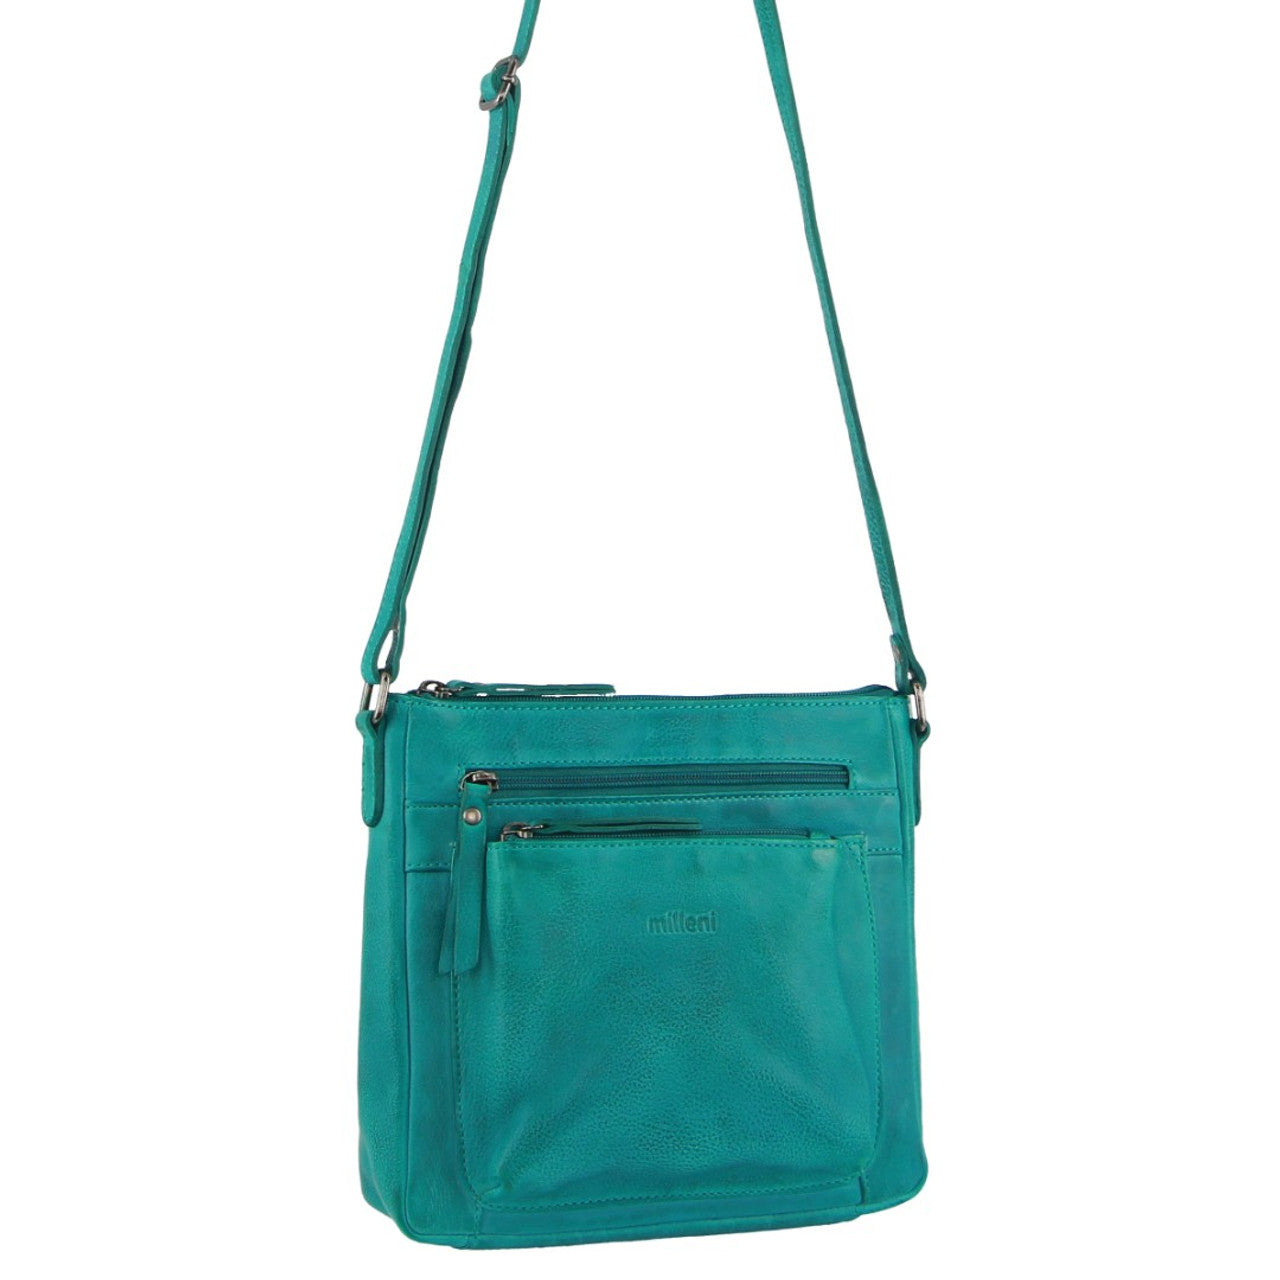 Milleni - NL2598 Leather cross body bag - Turquoise